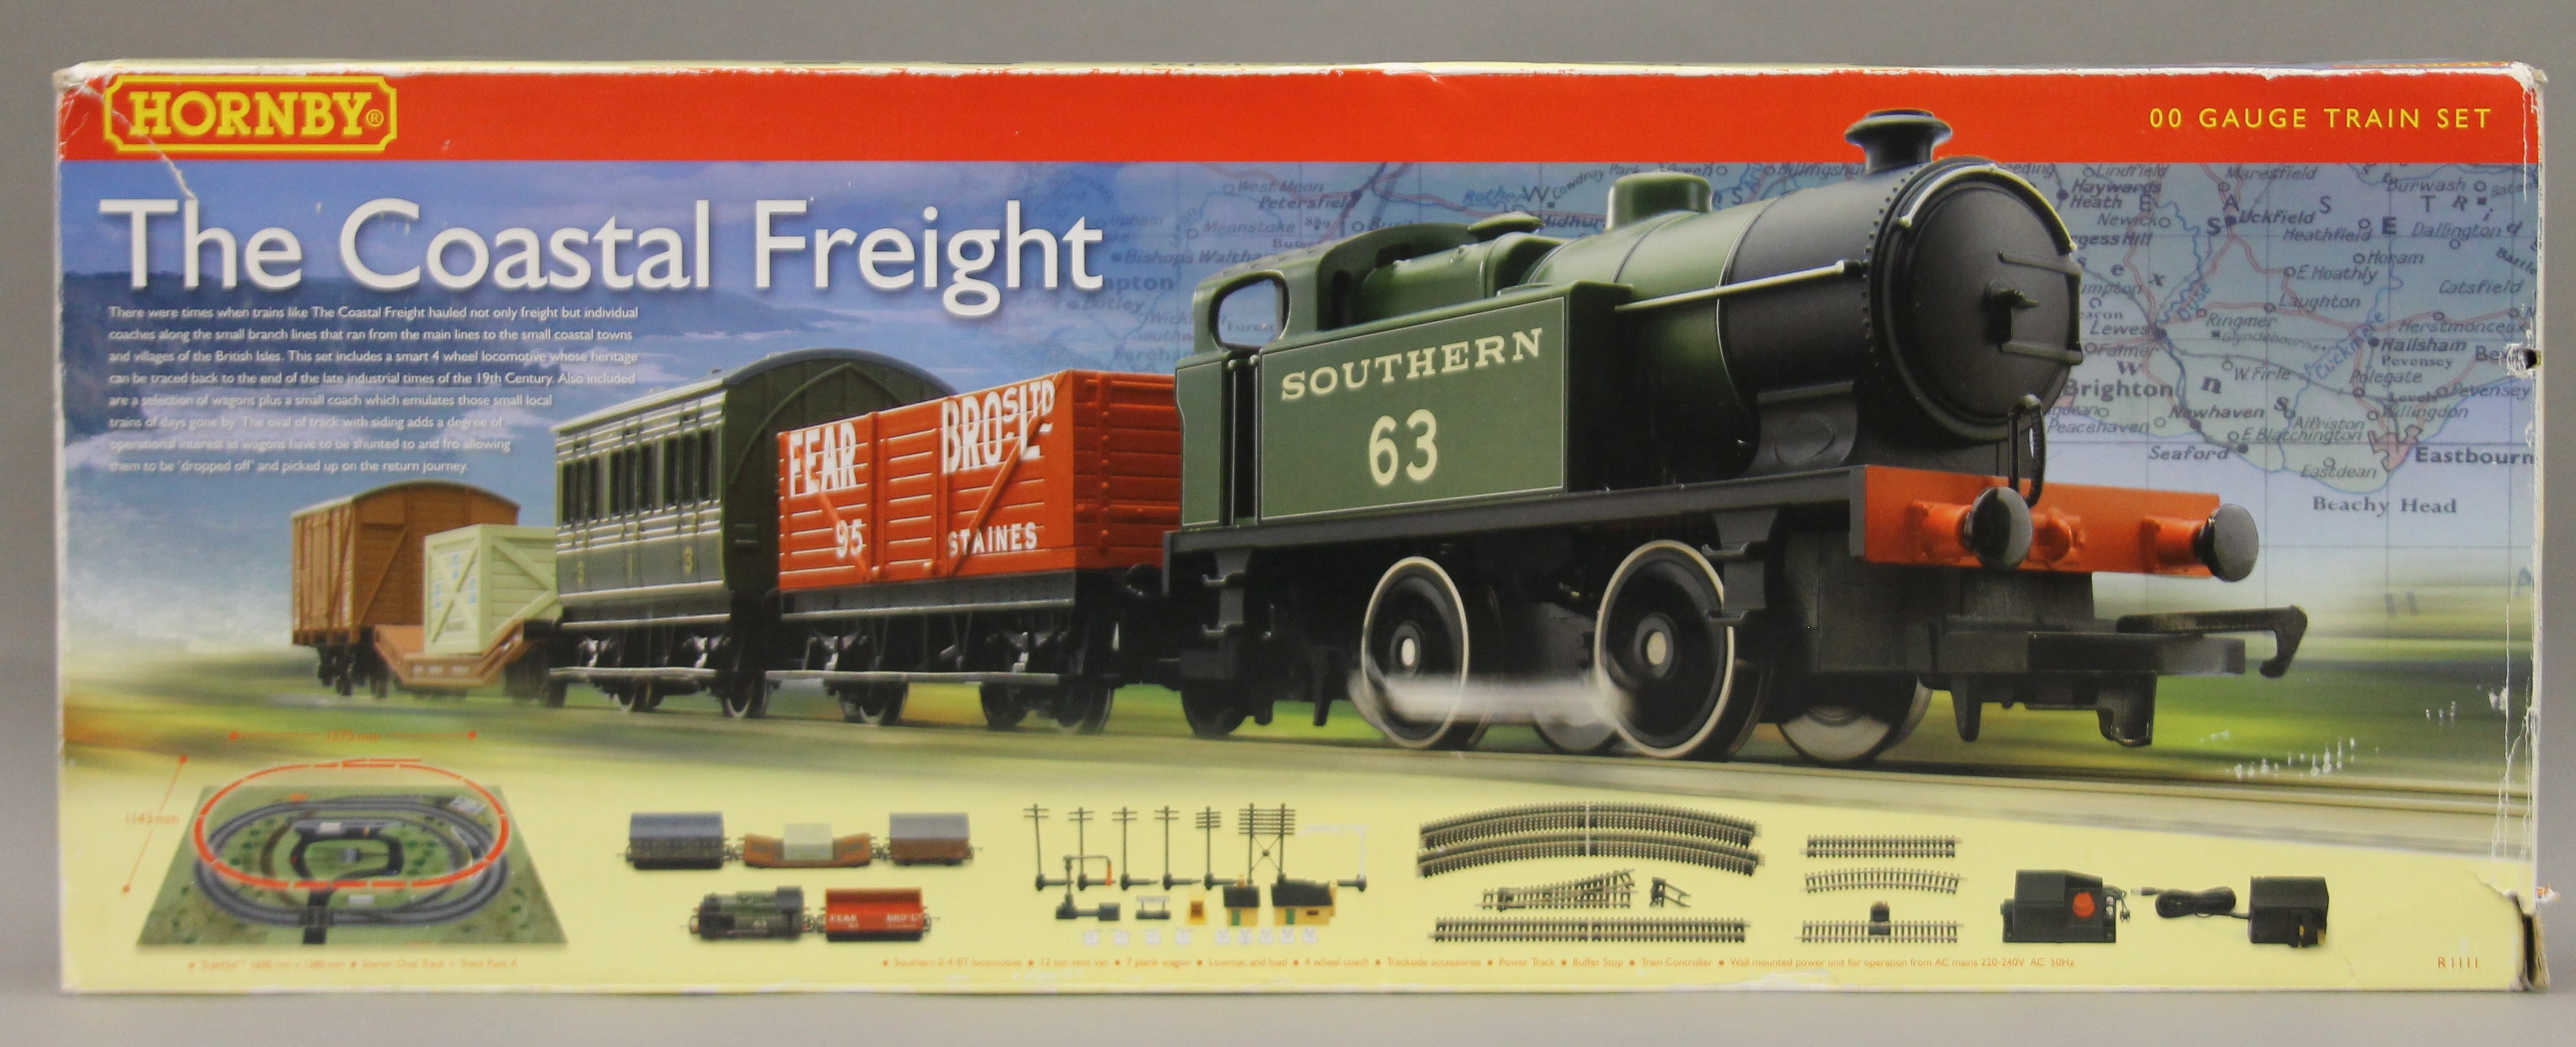 Two boxed Hornby OO Gauge train sets, a quantity of loose rolling stock and track, - Image 5 of 6